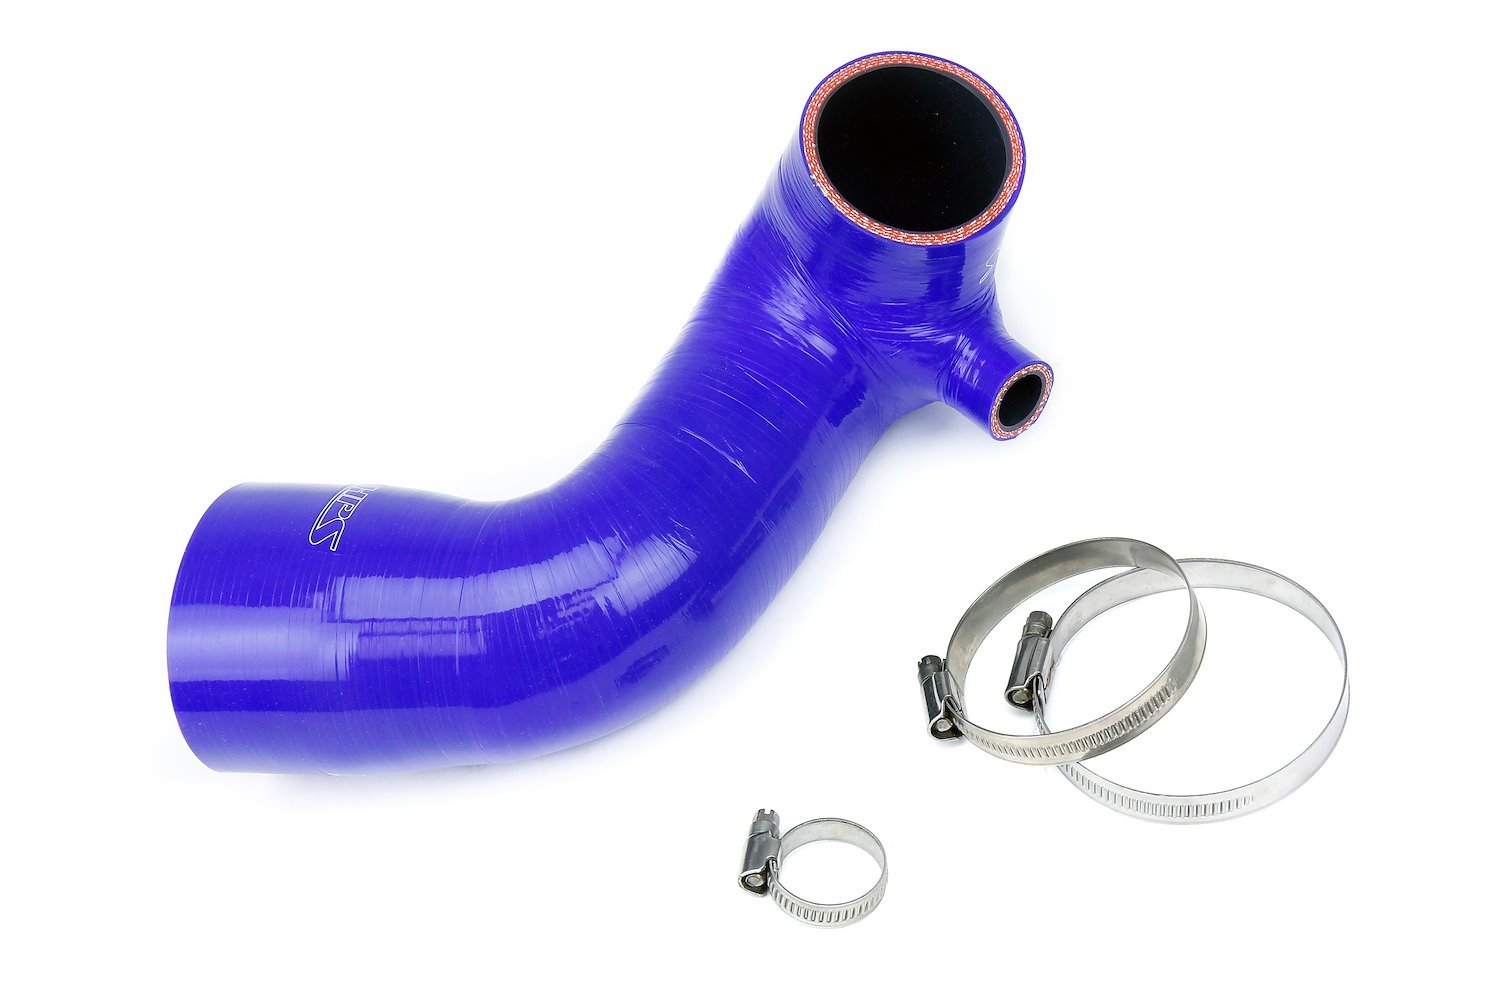 57-1726-BLUE Silicone Intake Kit, Replaces Restrictive Stock Air Intake Tube, Improve Drivability, No Heat Soak